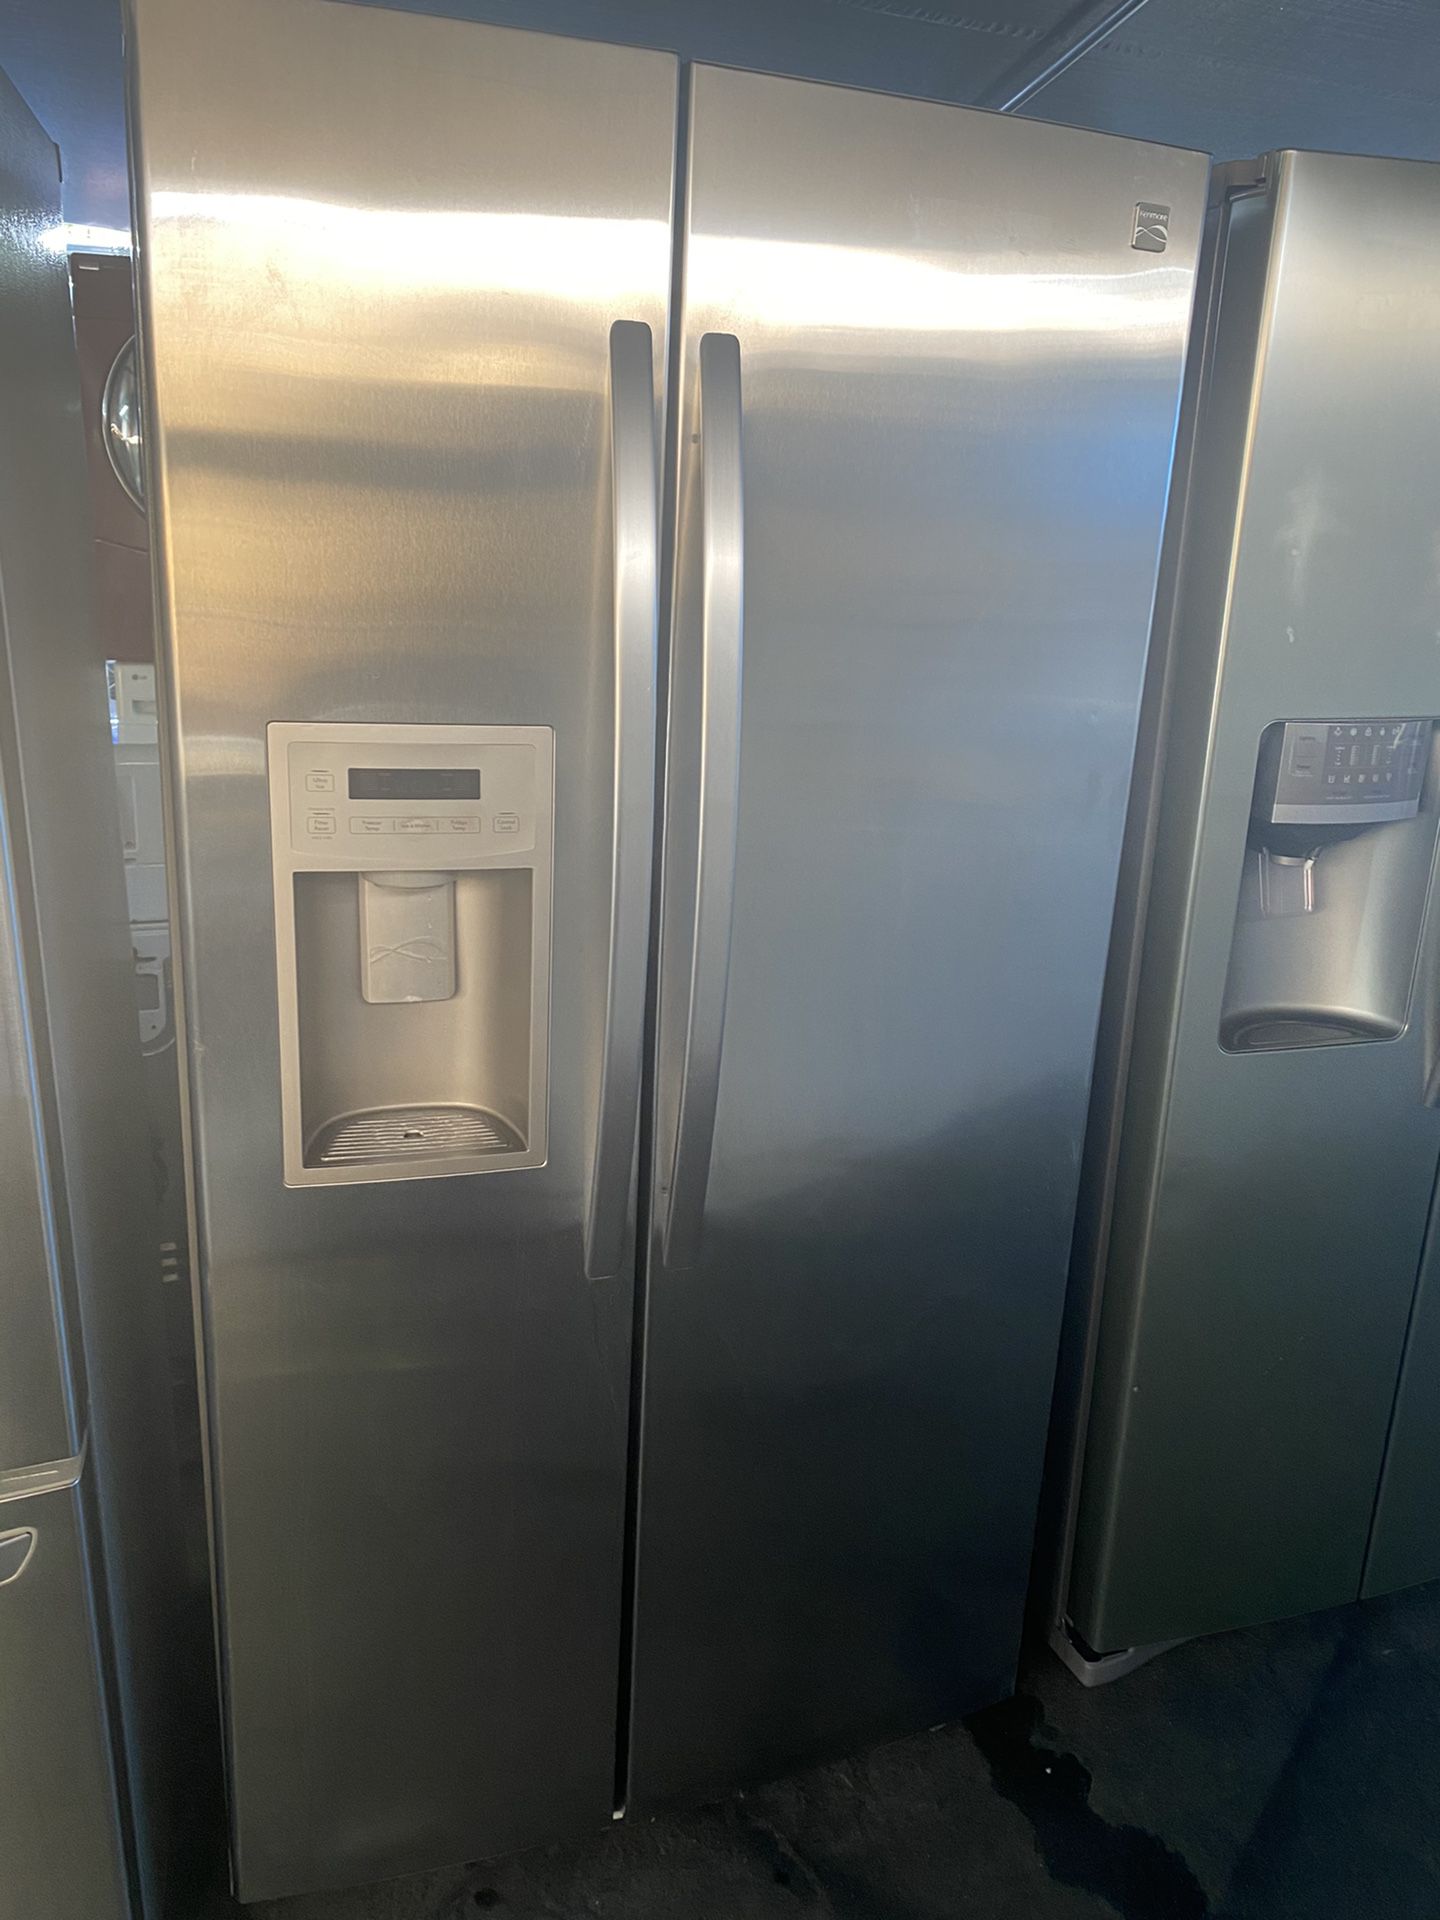 $649 Kenmore Stainless steel side-by-side refrigerator with delivery in the San Fernando Valley